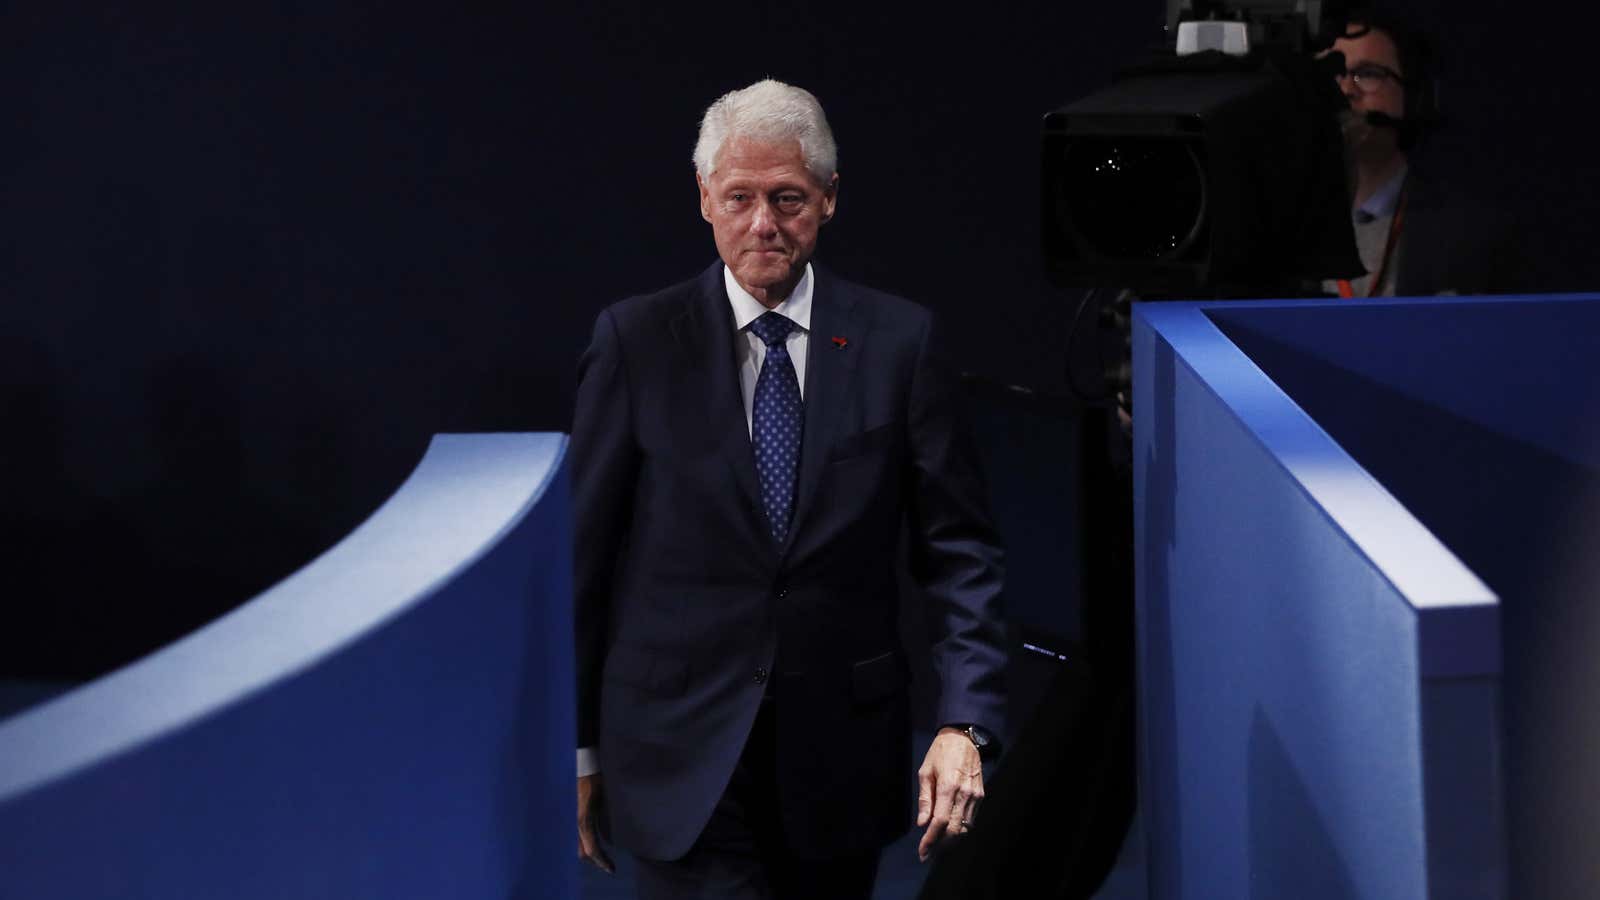 Former U.S. President Bill Clinton arrives at the town hall debate